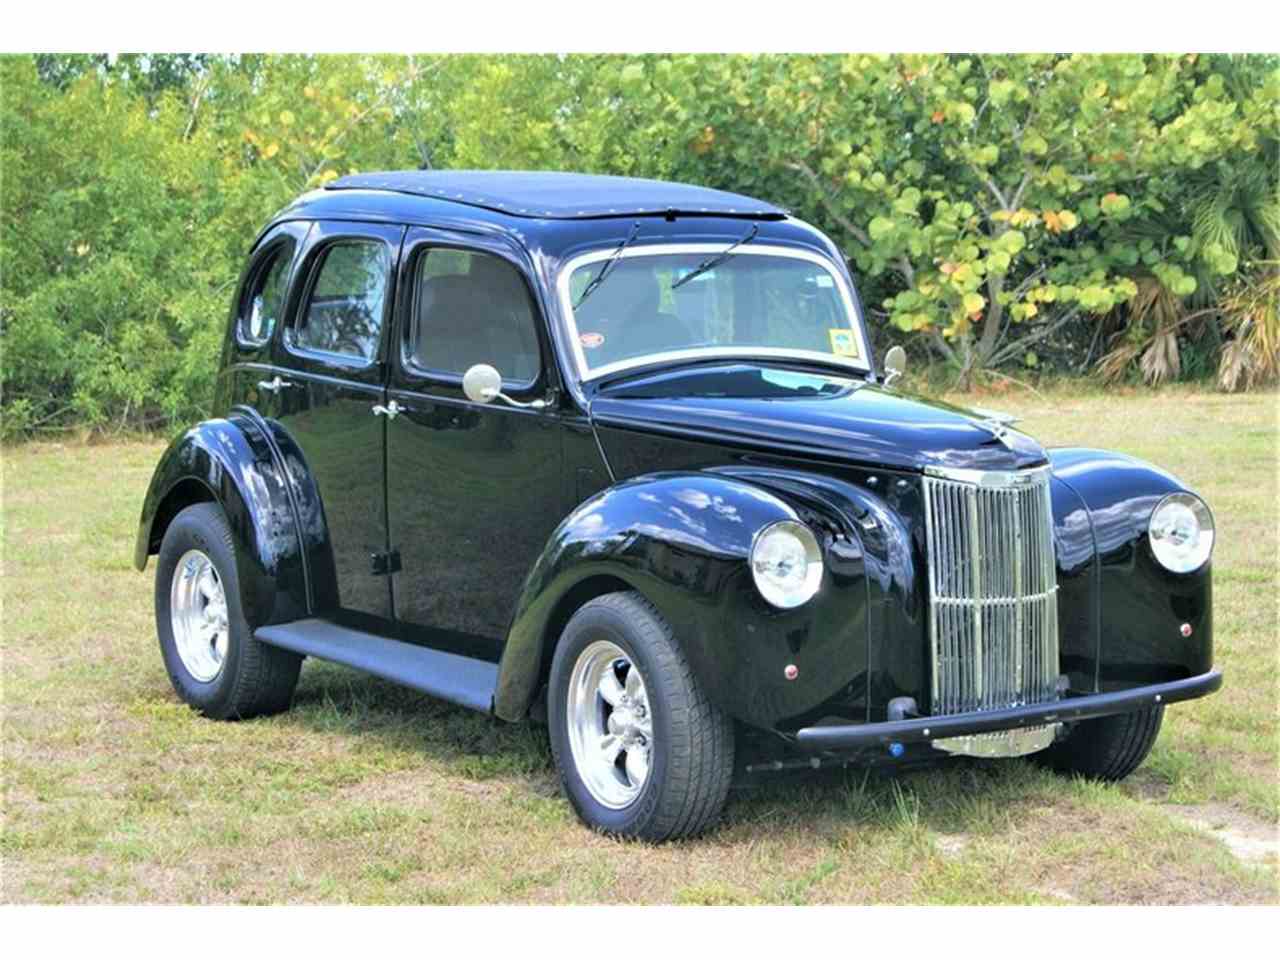 1951 English Ford Prefect 4 Door Saloon For Sale Cc 1040664